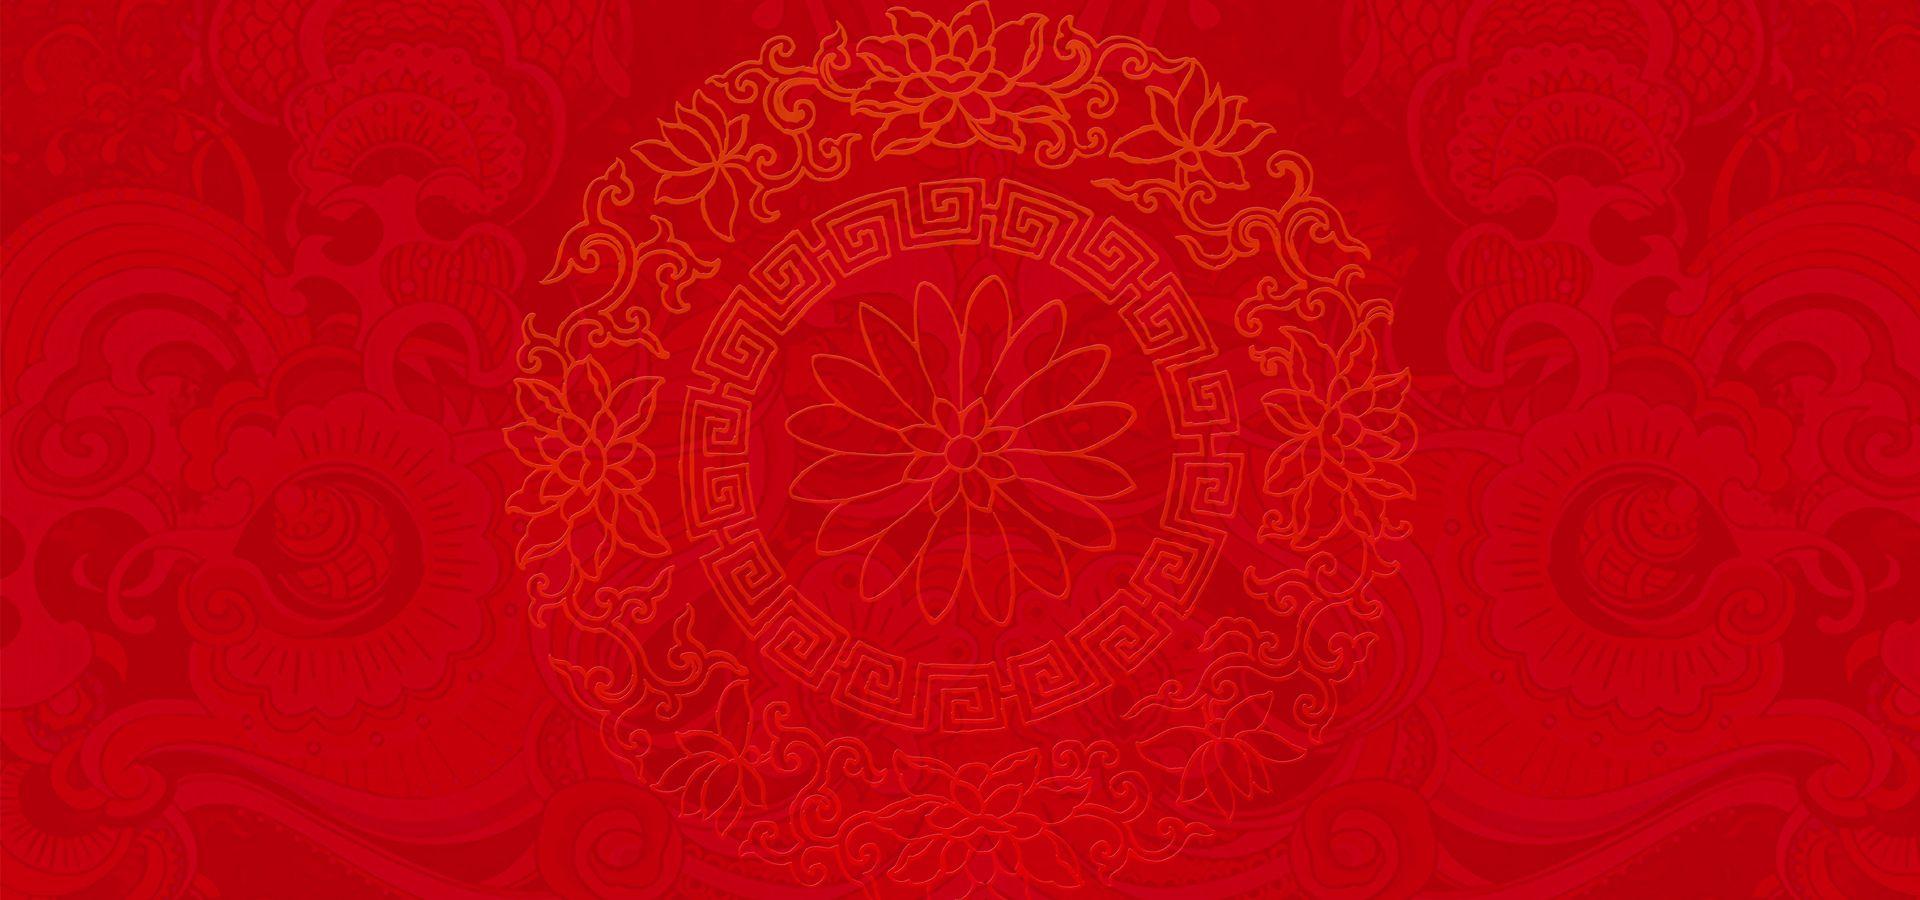 Chinese New Year Festive Red Theme. Chinese new year background, Chinese background, Red background image